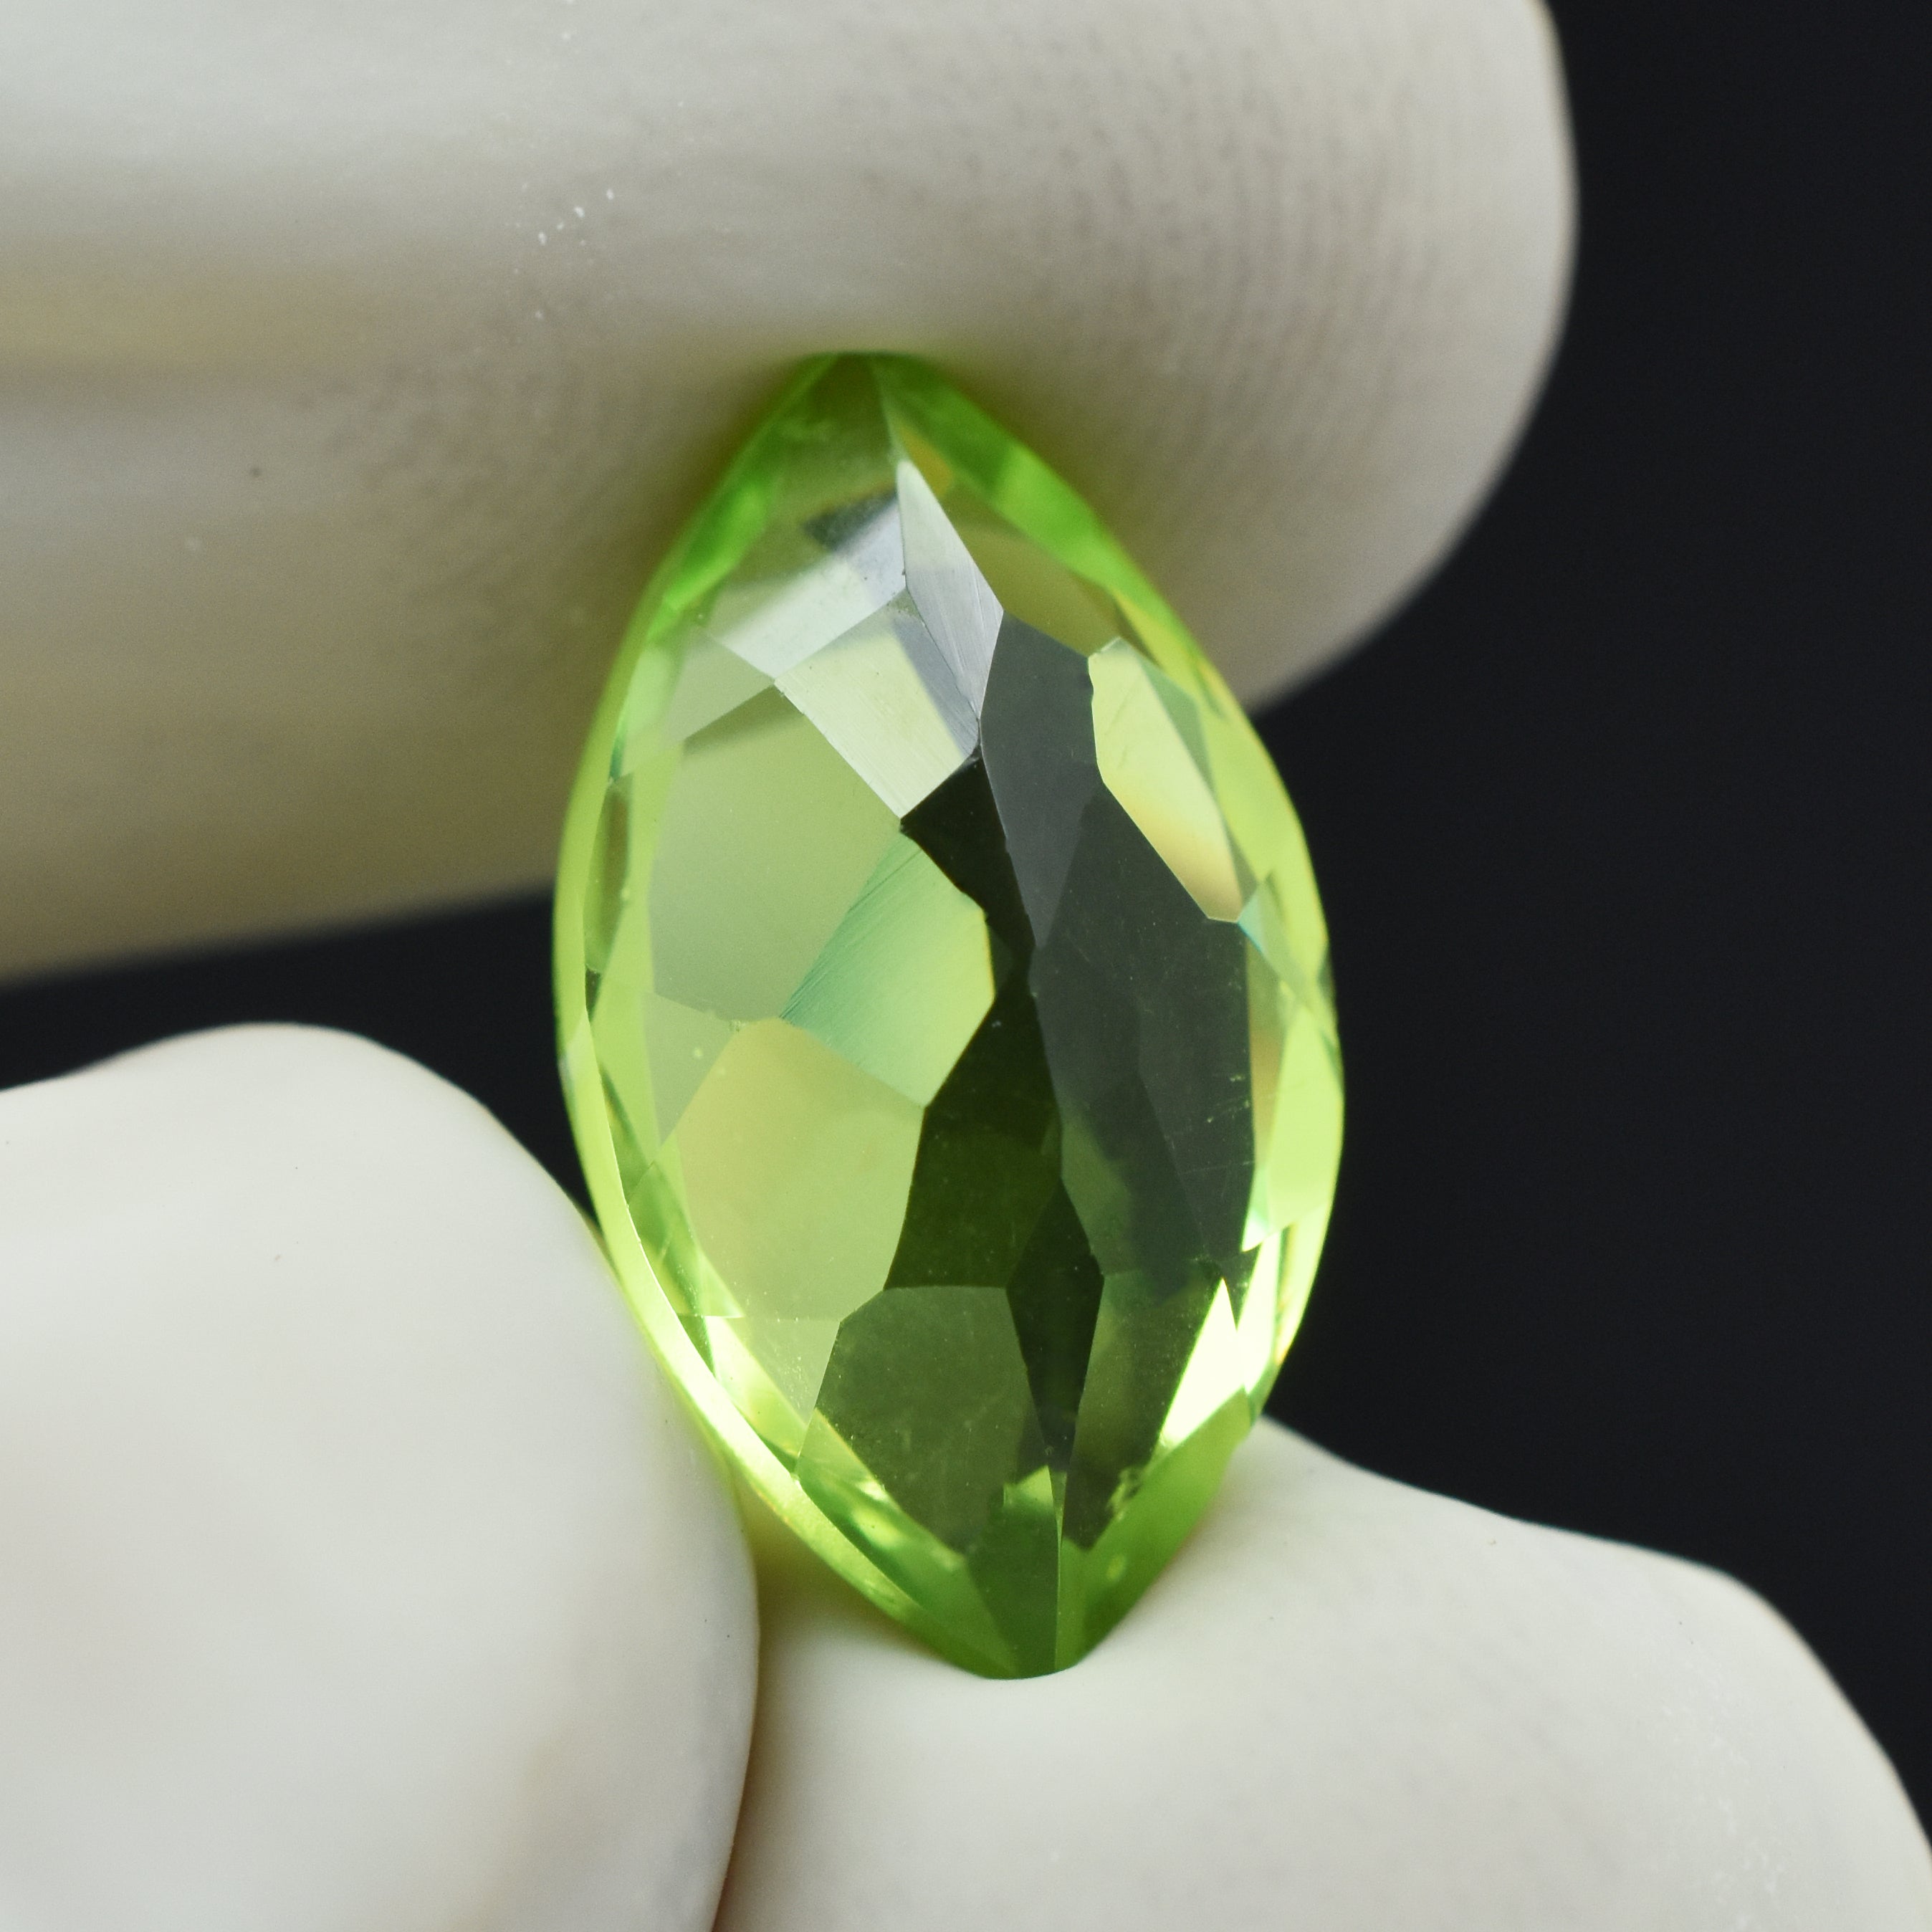 Best For Overall well-being & Renewal Peridot Gem !!! Natural Green Peridot 9.84 Carat Marquise Shape Certified Loose Gemstone | Free Delivery FREE Gift | ON SALE Peridot Green